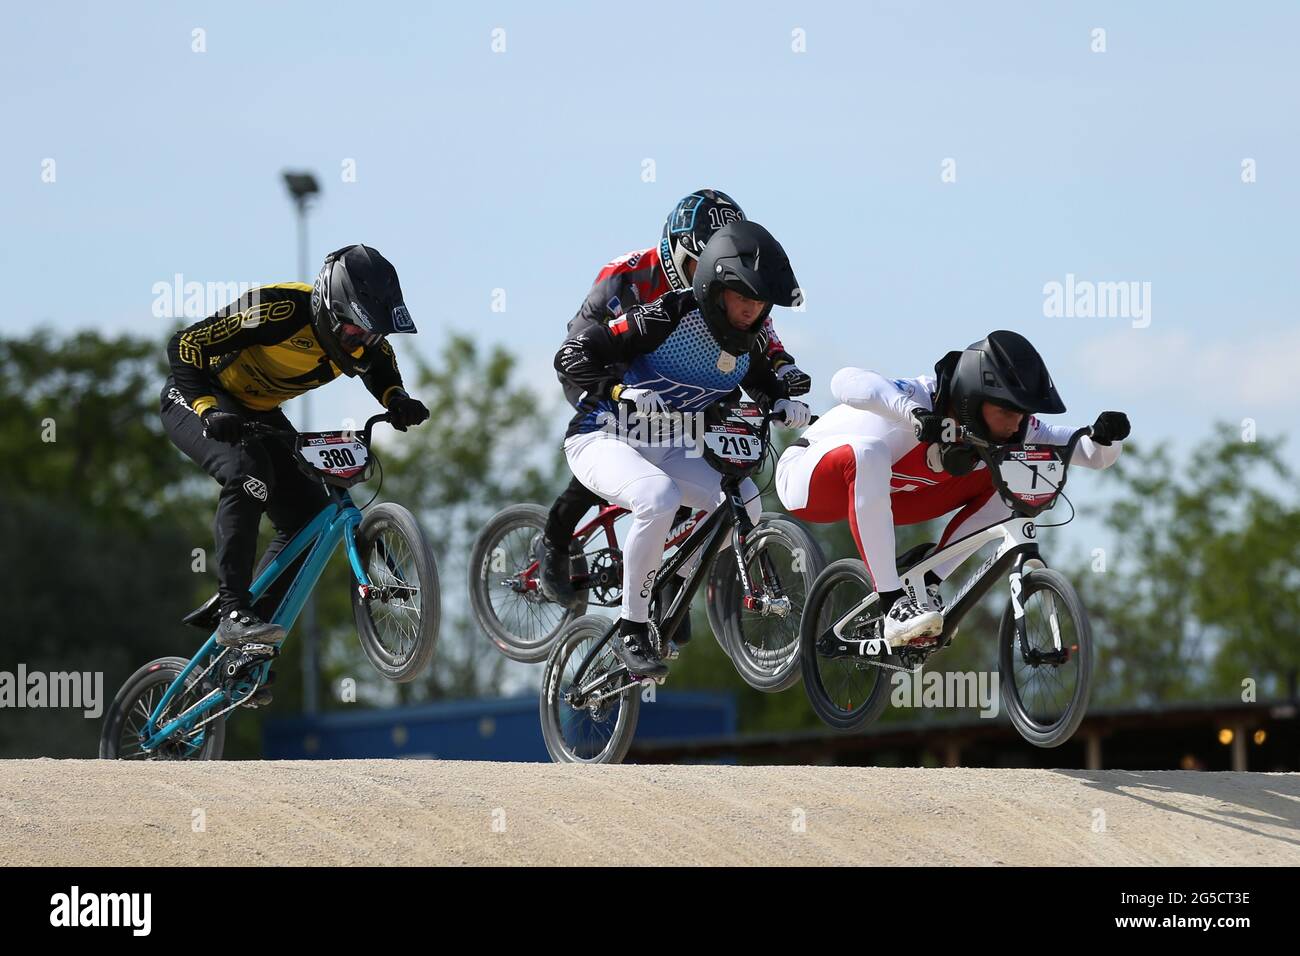 Dylan GOBERT of France (219) and David GRAF of Switzerland (7) competes in the UCI BMX Supercross World Cup Round 1 at the BMX Olympic Arena on May 8t Stock Photo